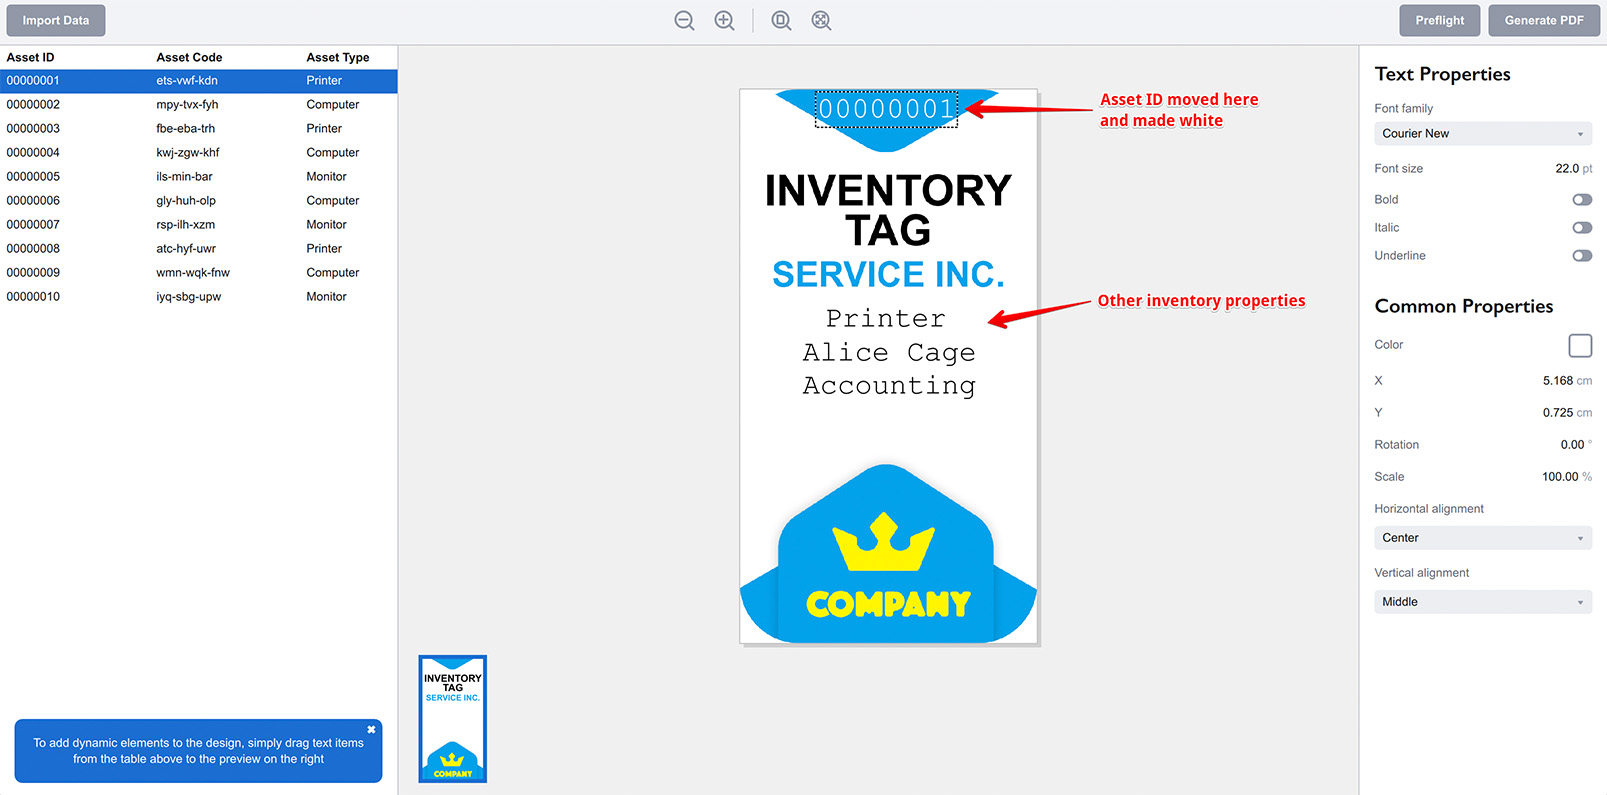 More inventory data is added to the template